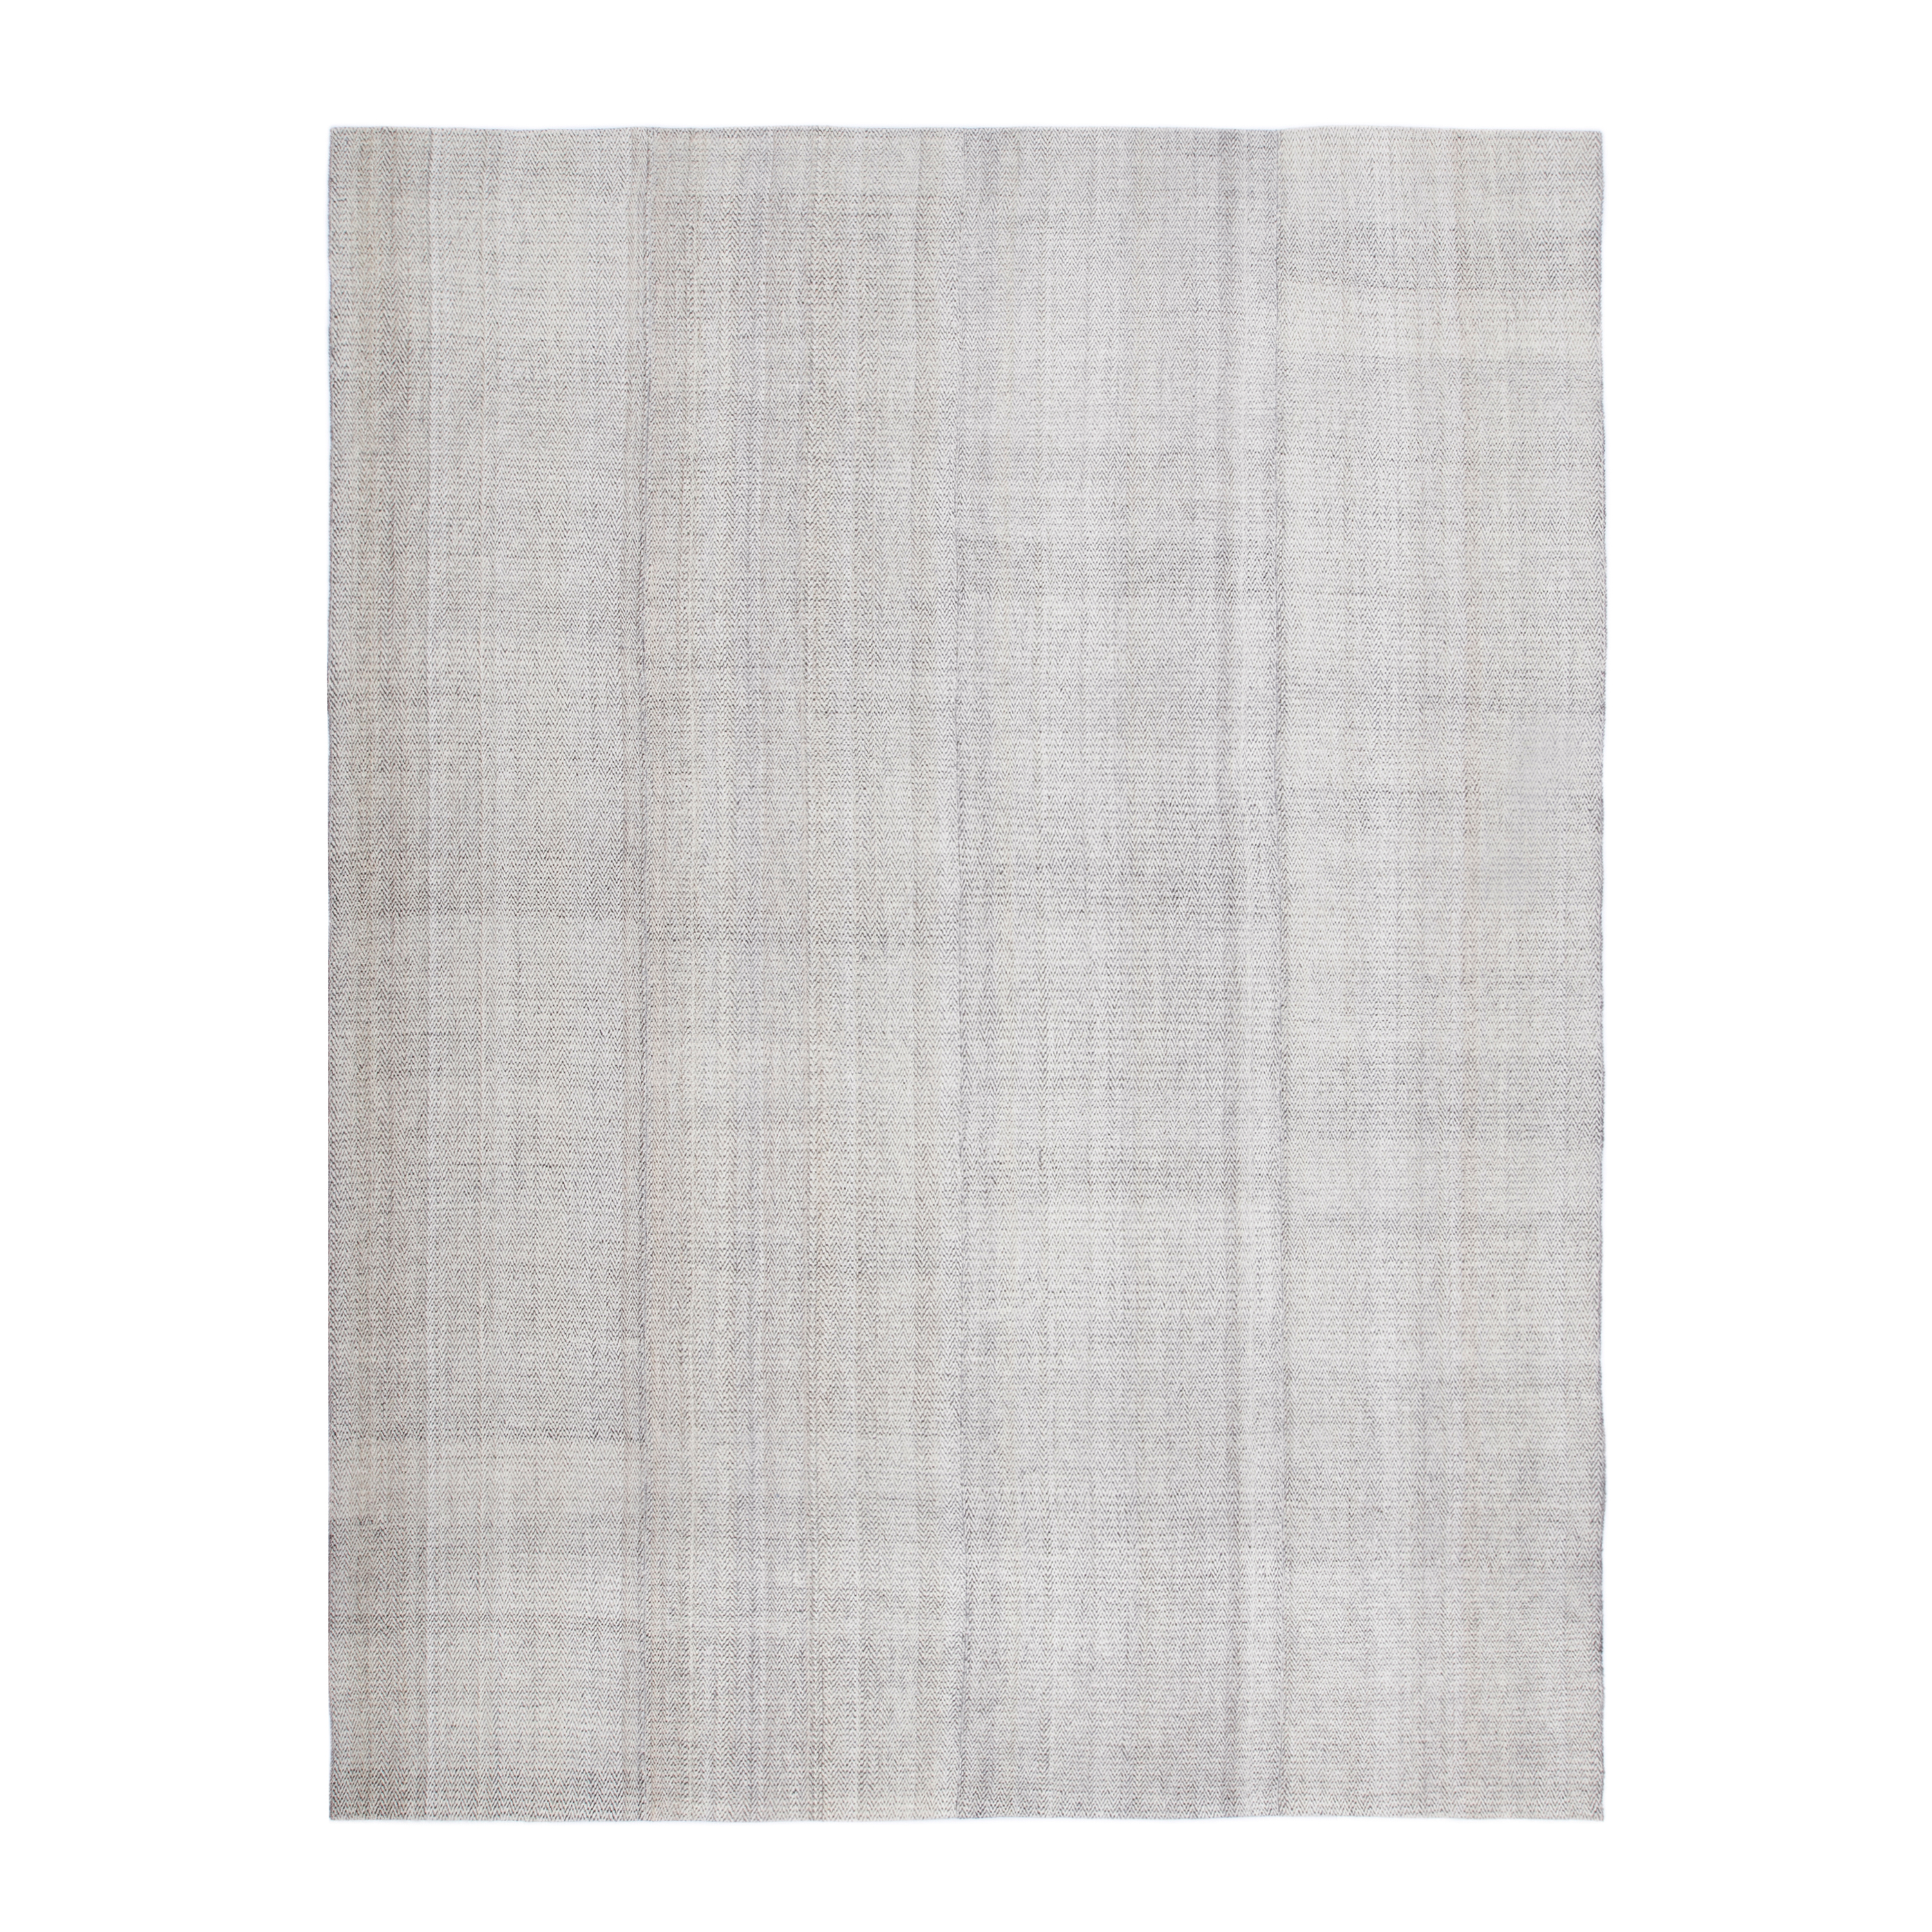 This Pelas Charmo flatweave rug is made with handspun wool and natural dyes.